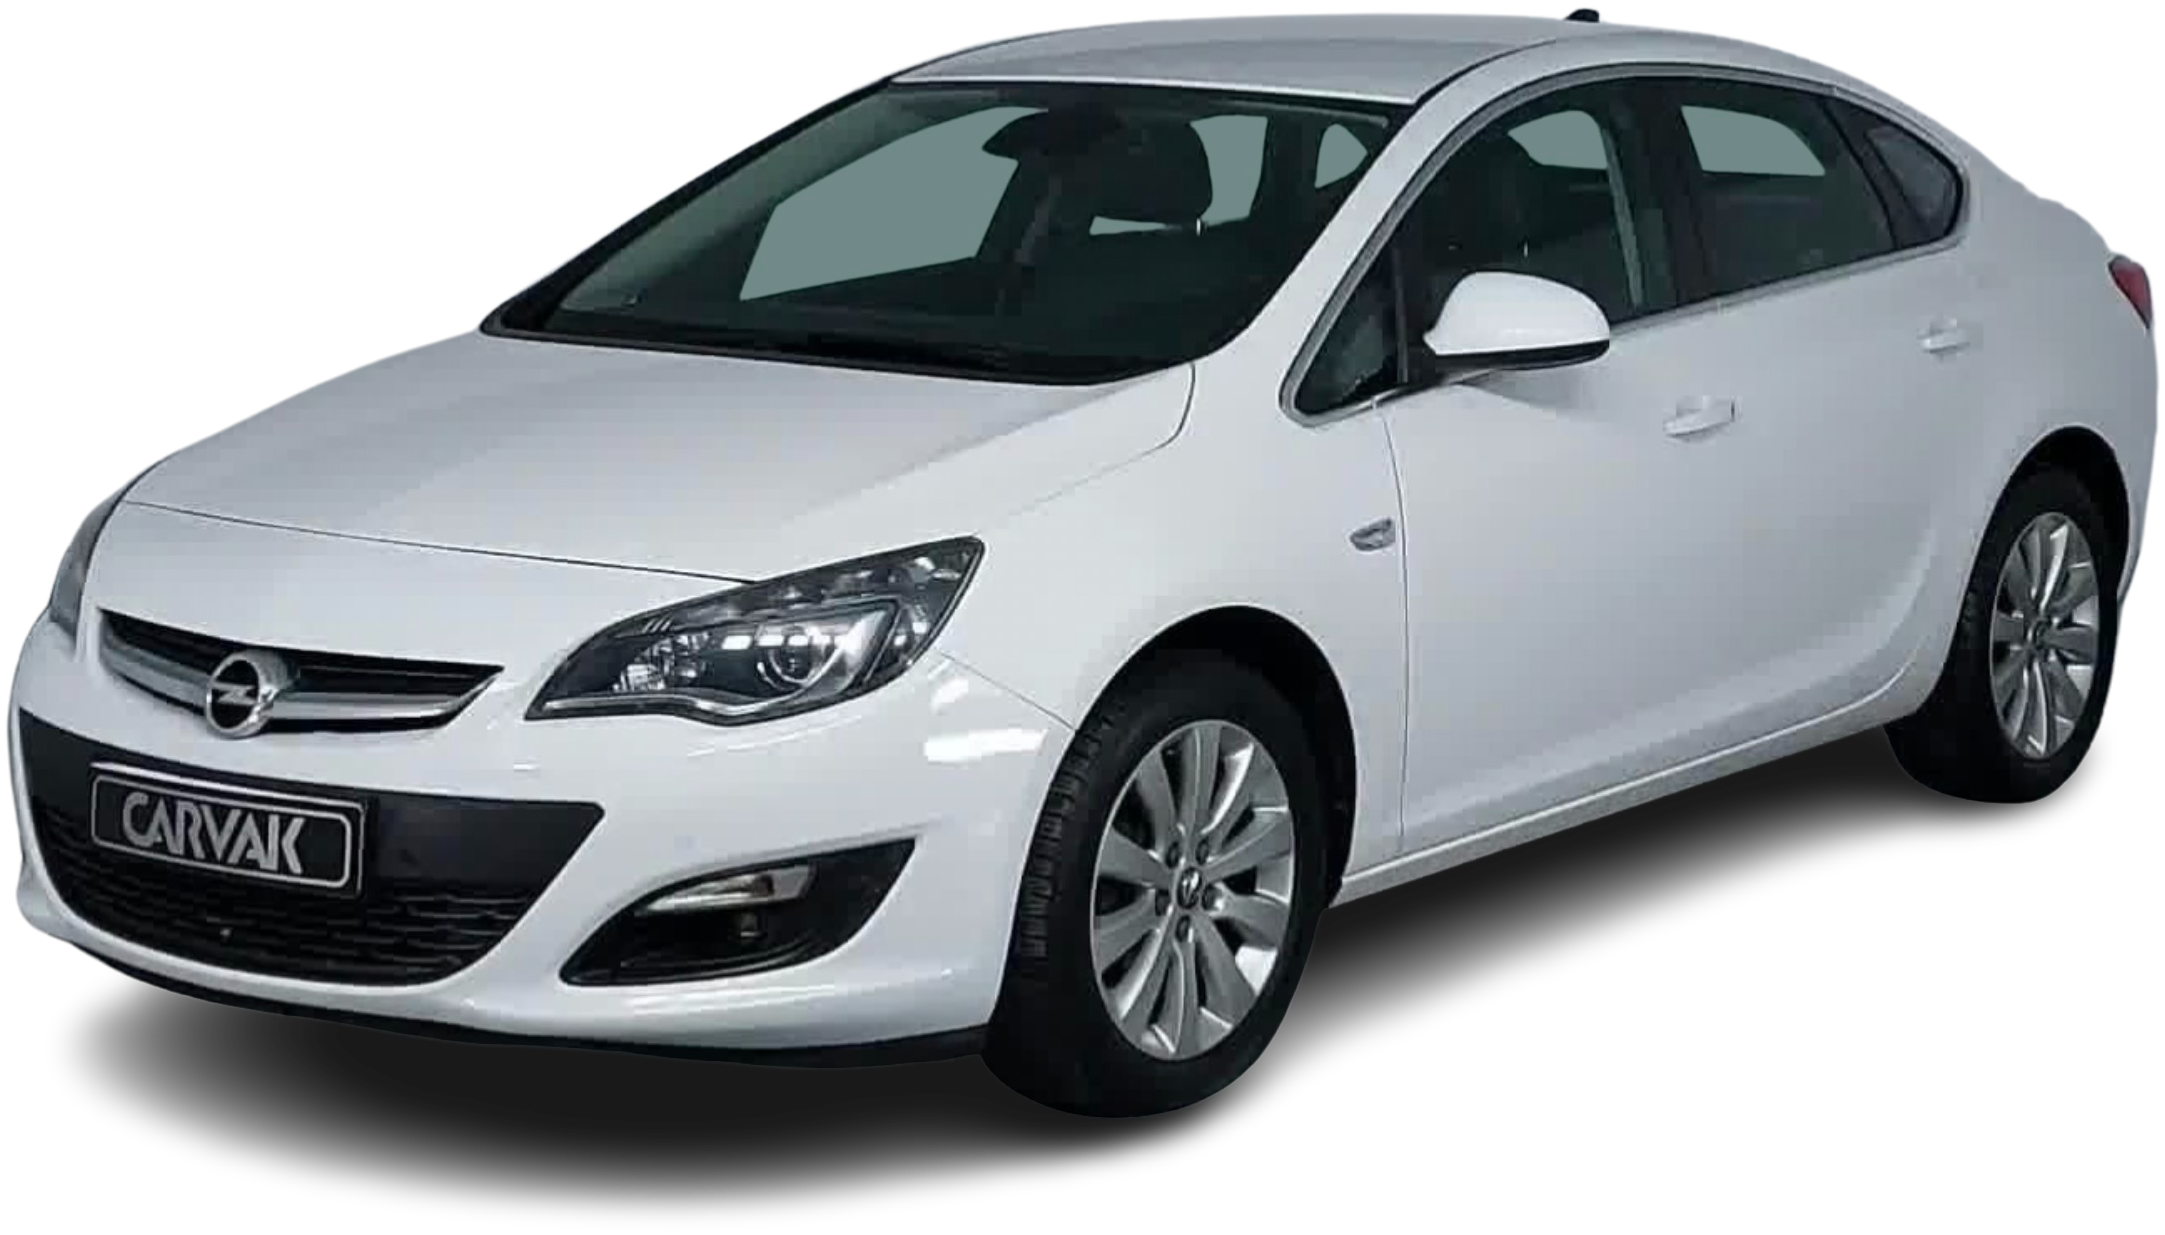 https://images.kavak.services/assets/images/families/opel/astra-2012-2020-sedan.png